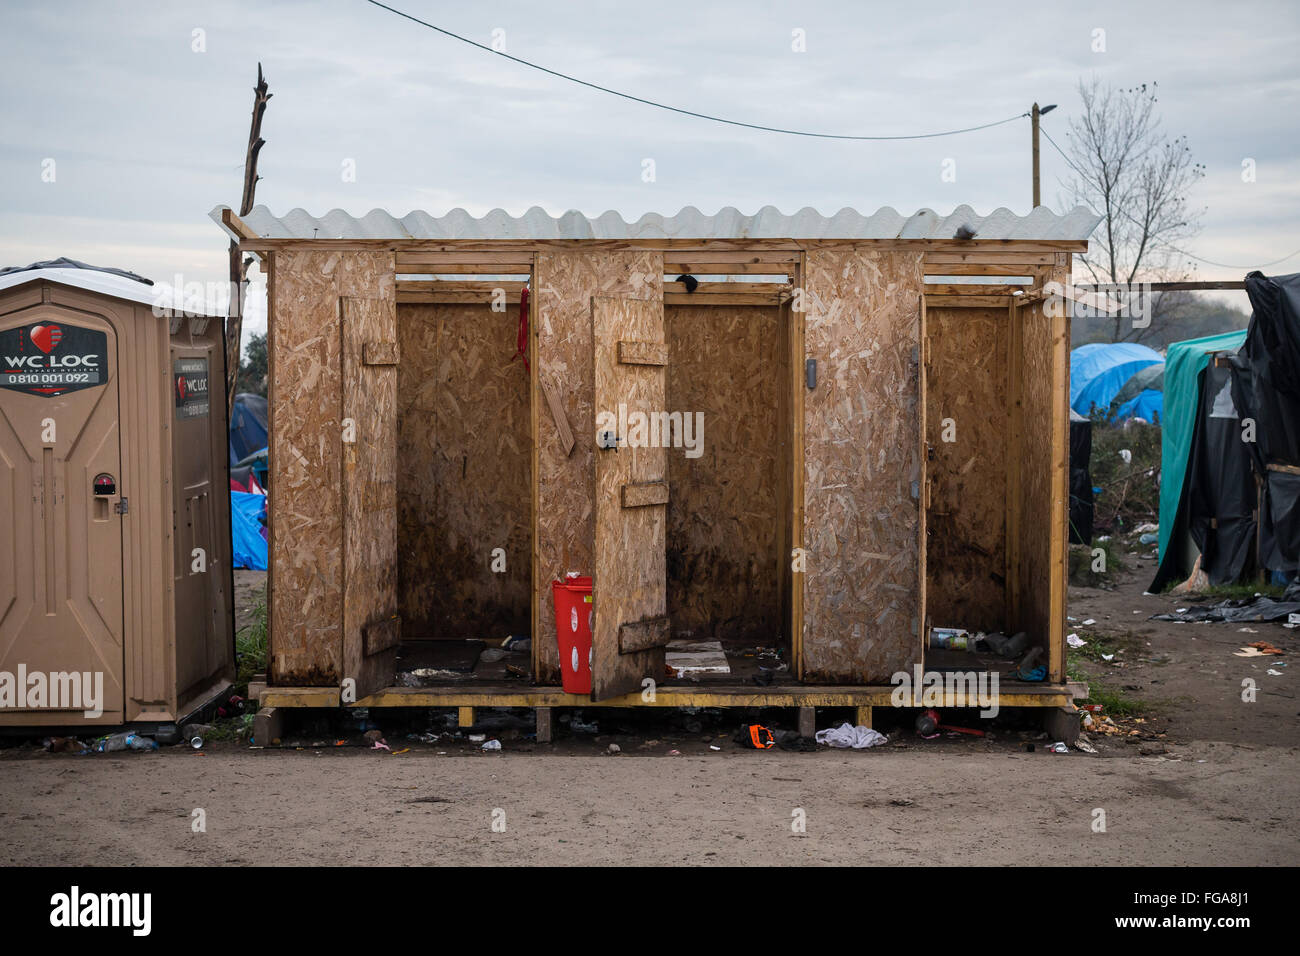 in the Jungle refugee camp, Calais, France. Stock Photo